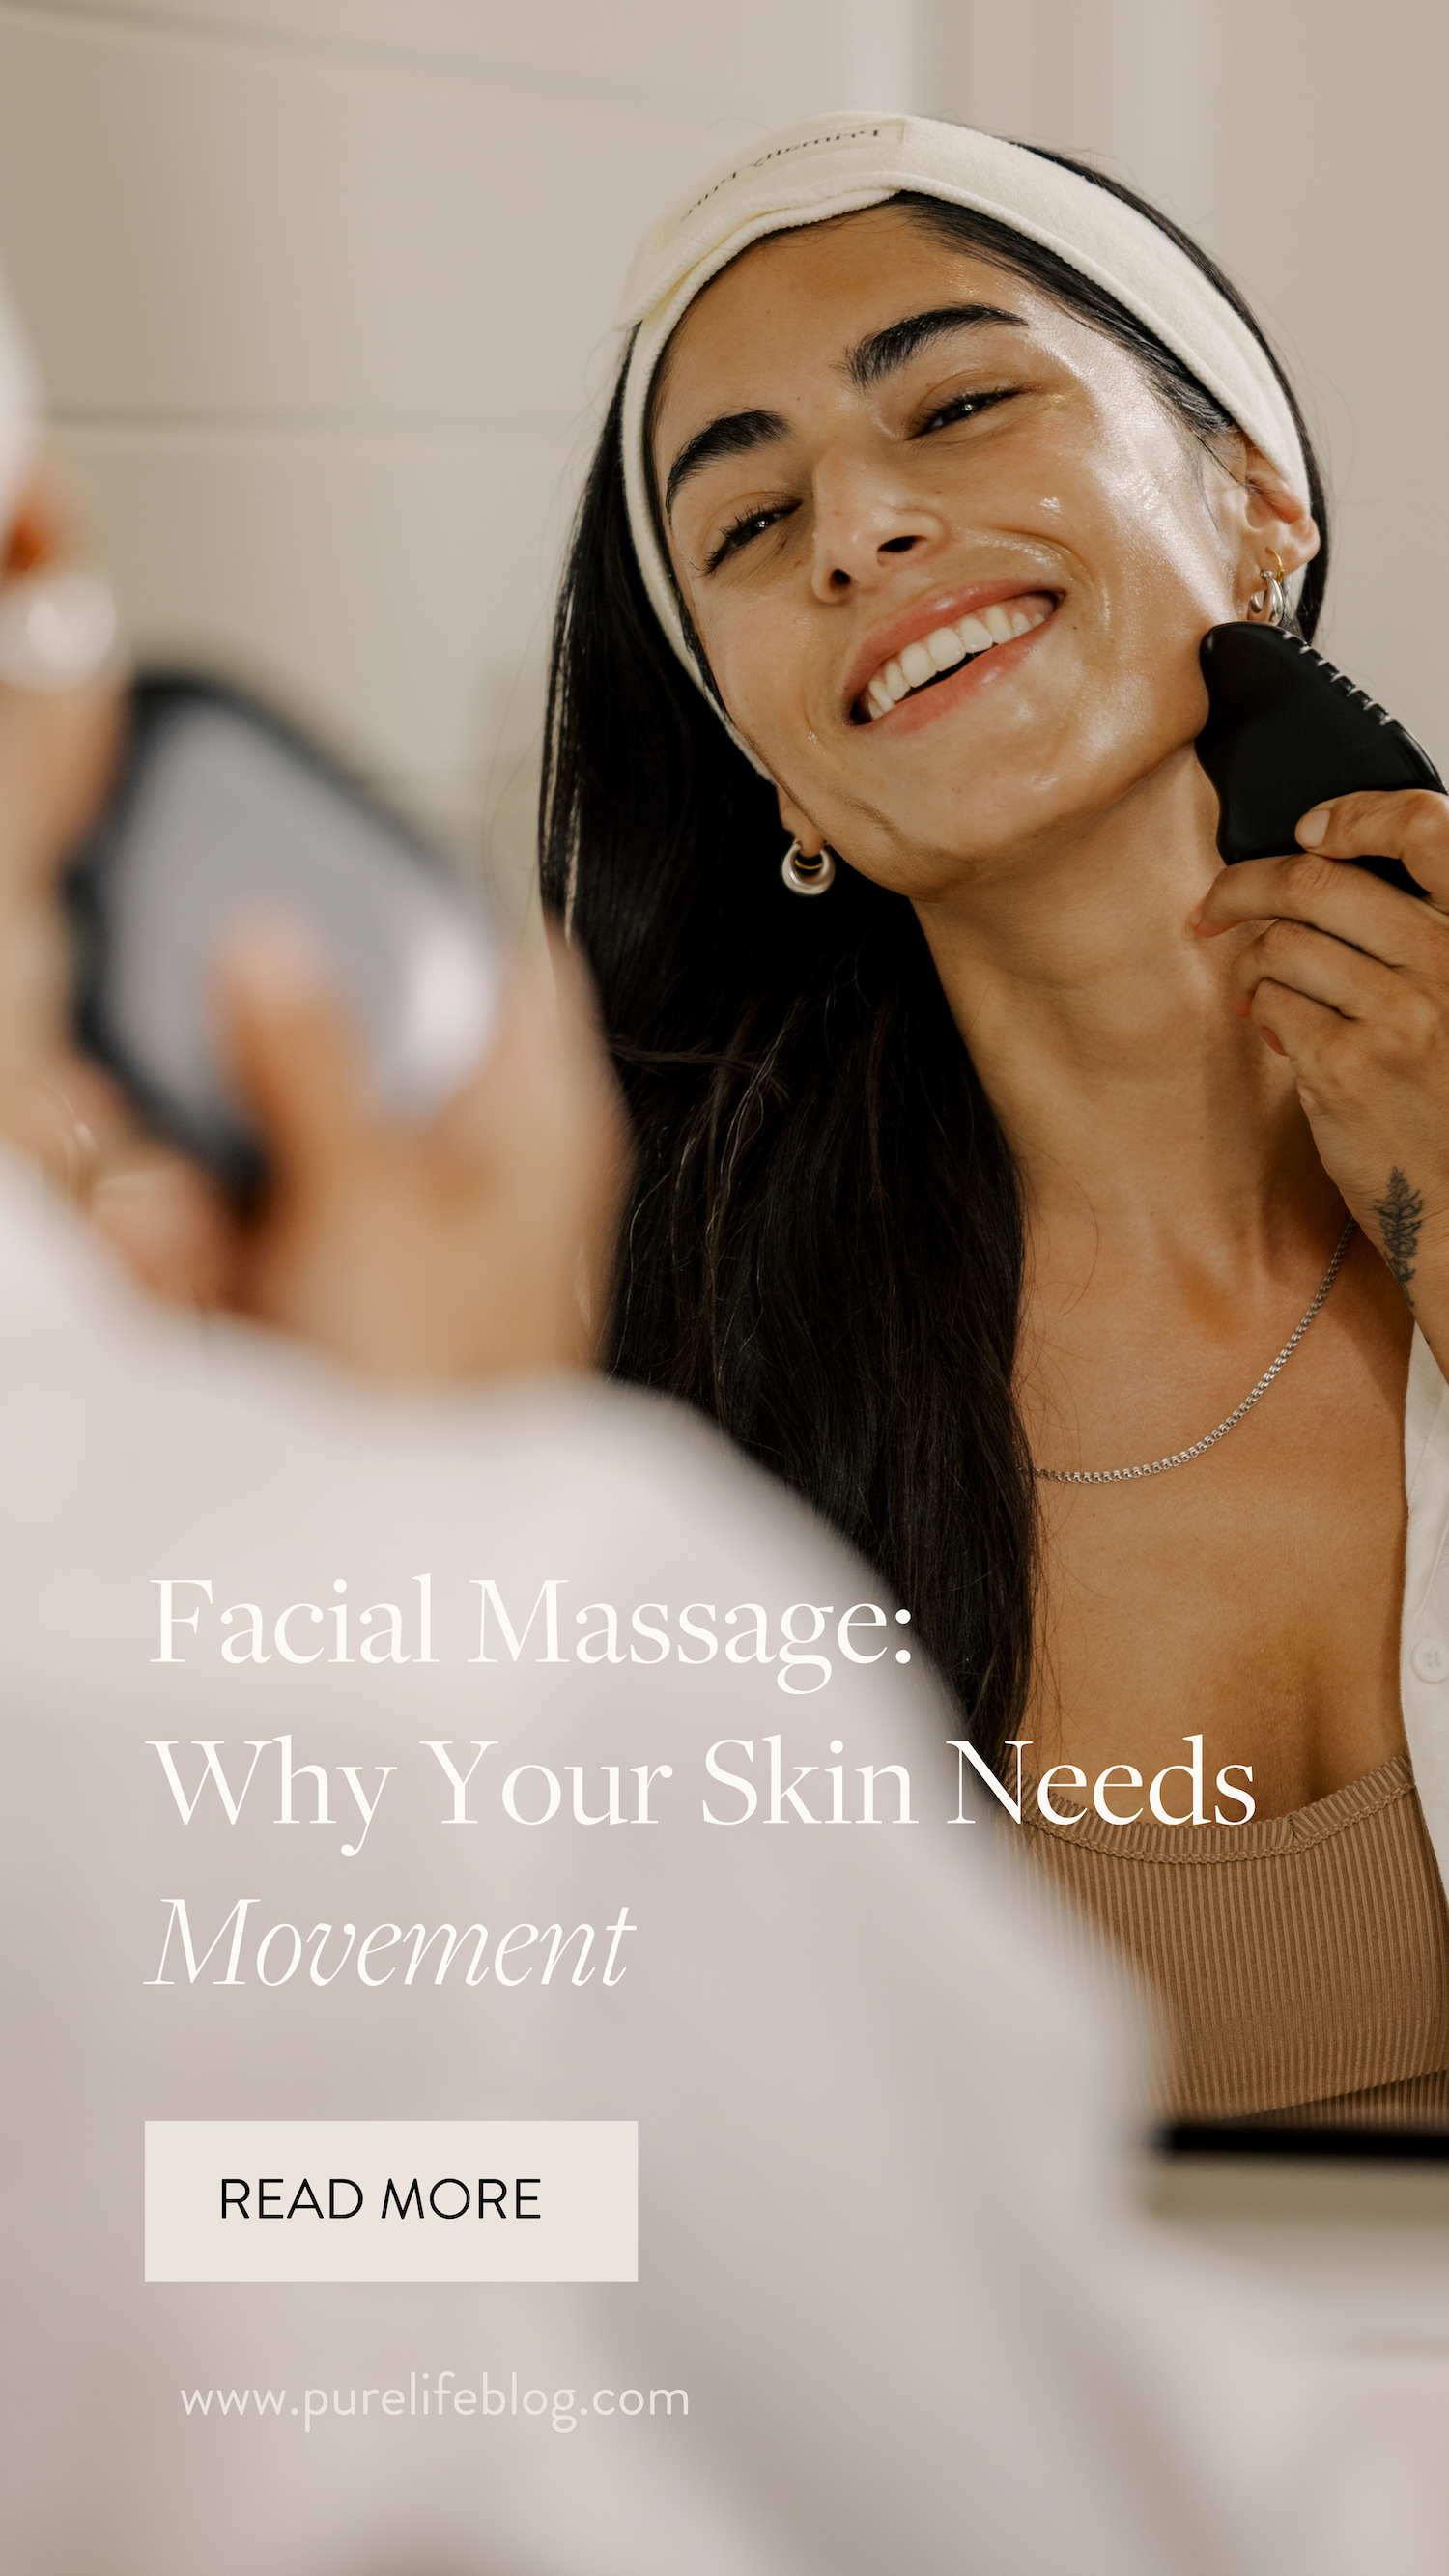 Movement is an essential component of skin health. Getting movement in through daily facial massage supports a naturally youthful, clear, + toned complexion. | Primally Pure Skincare